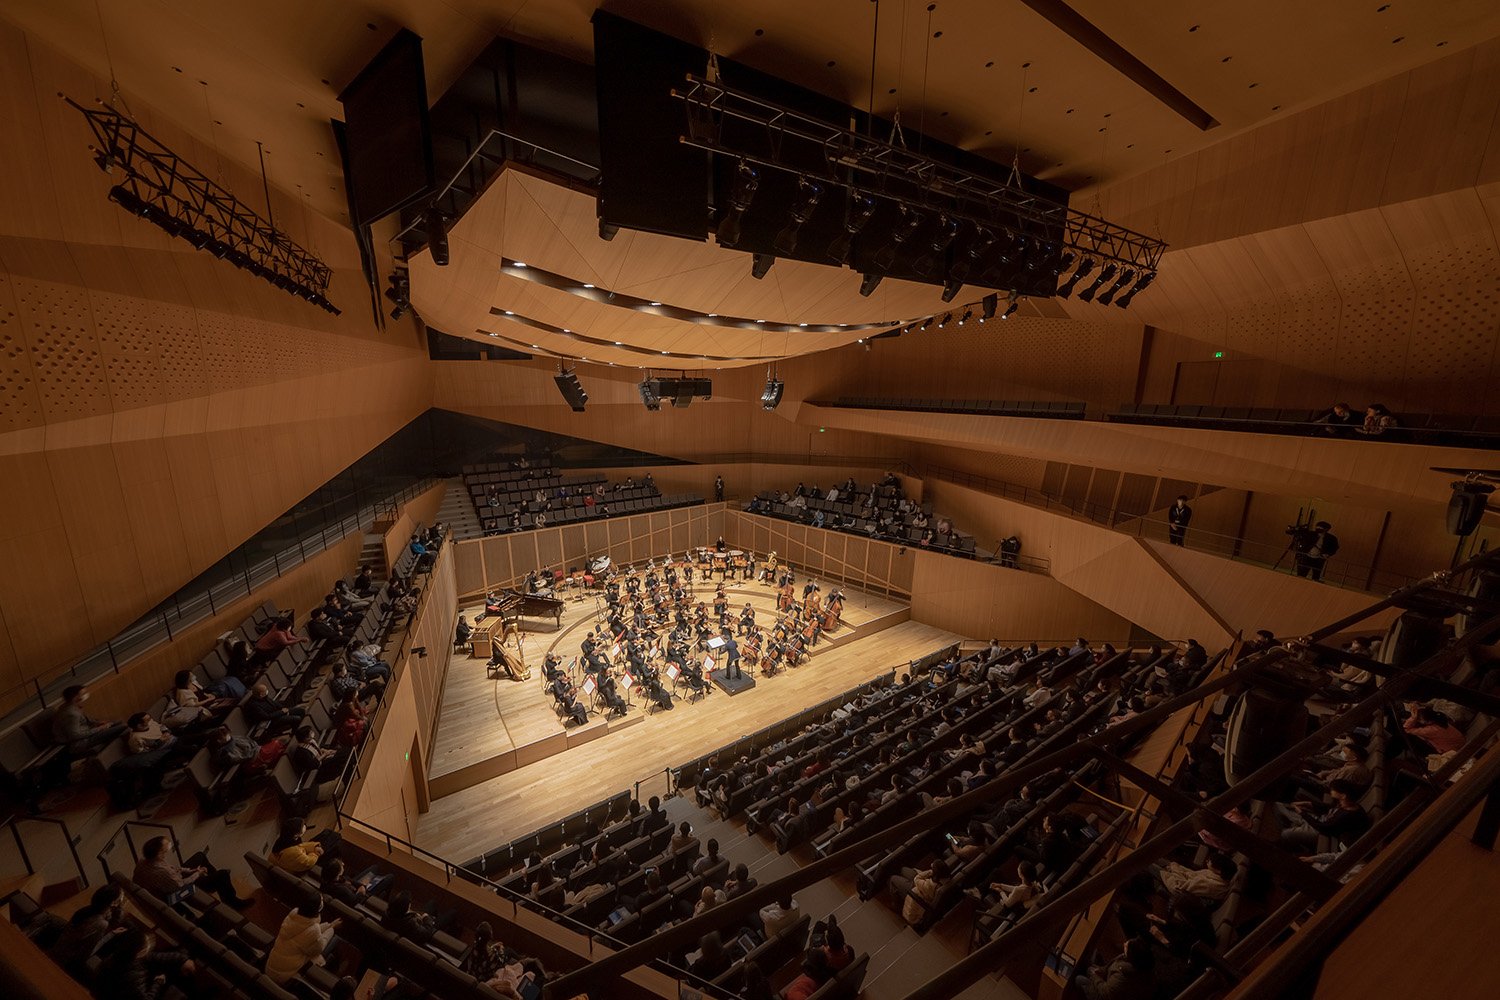 Concert Hall Performance | Photo by Zhang Chao